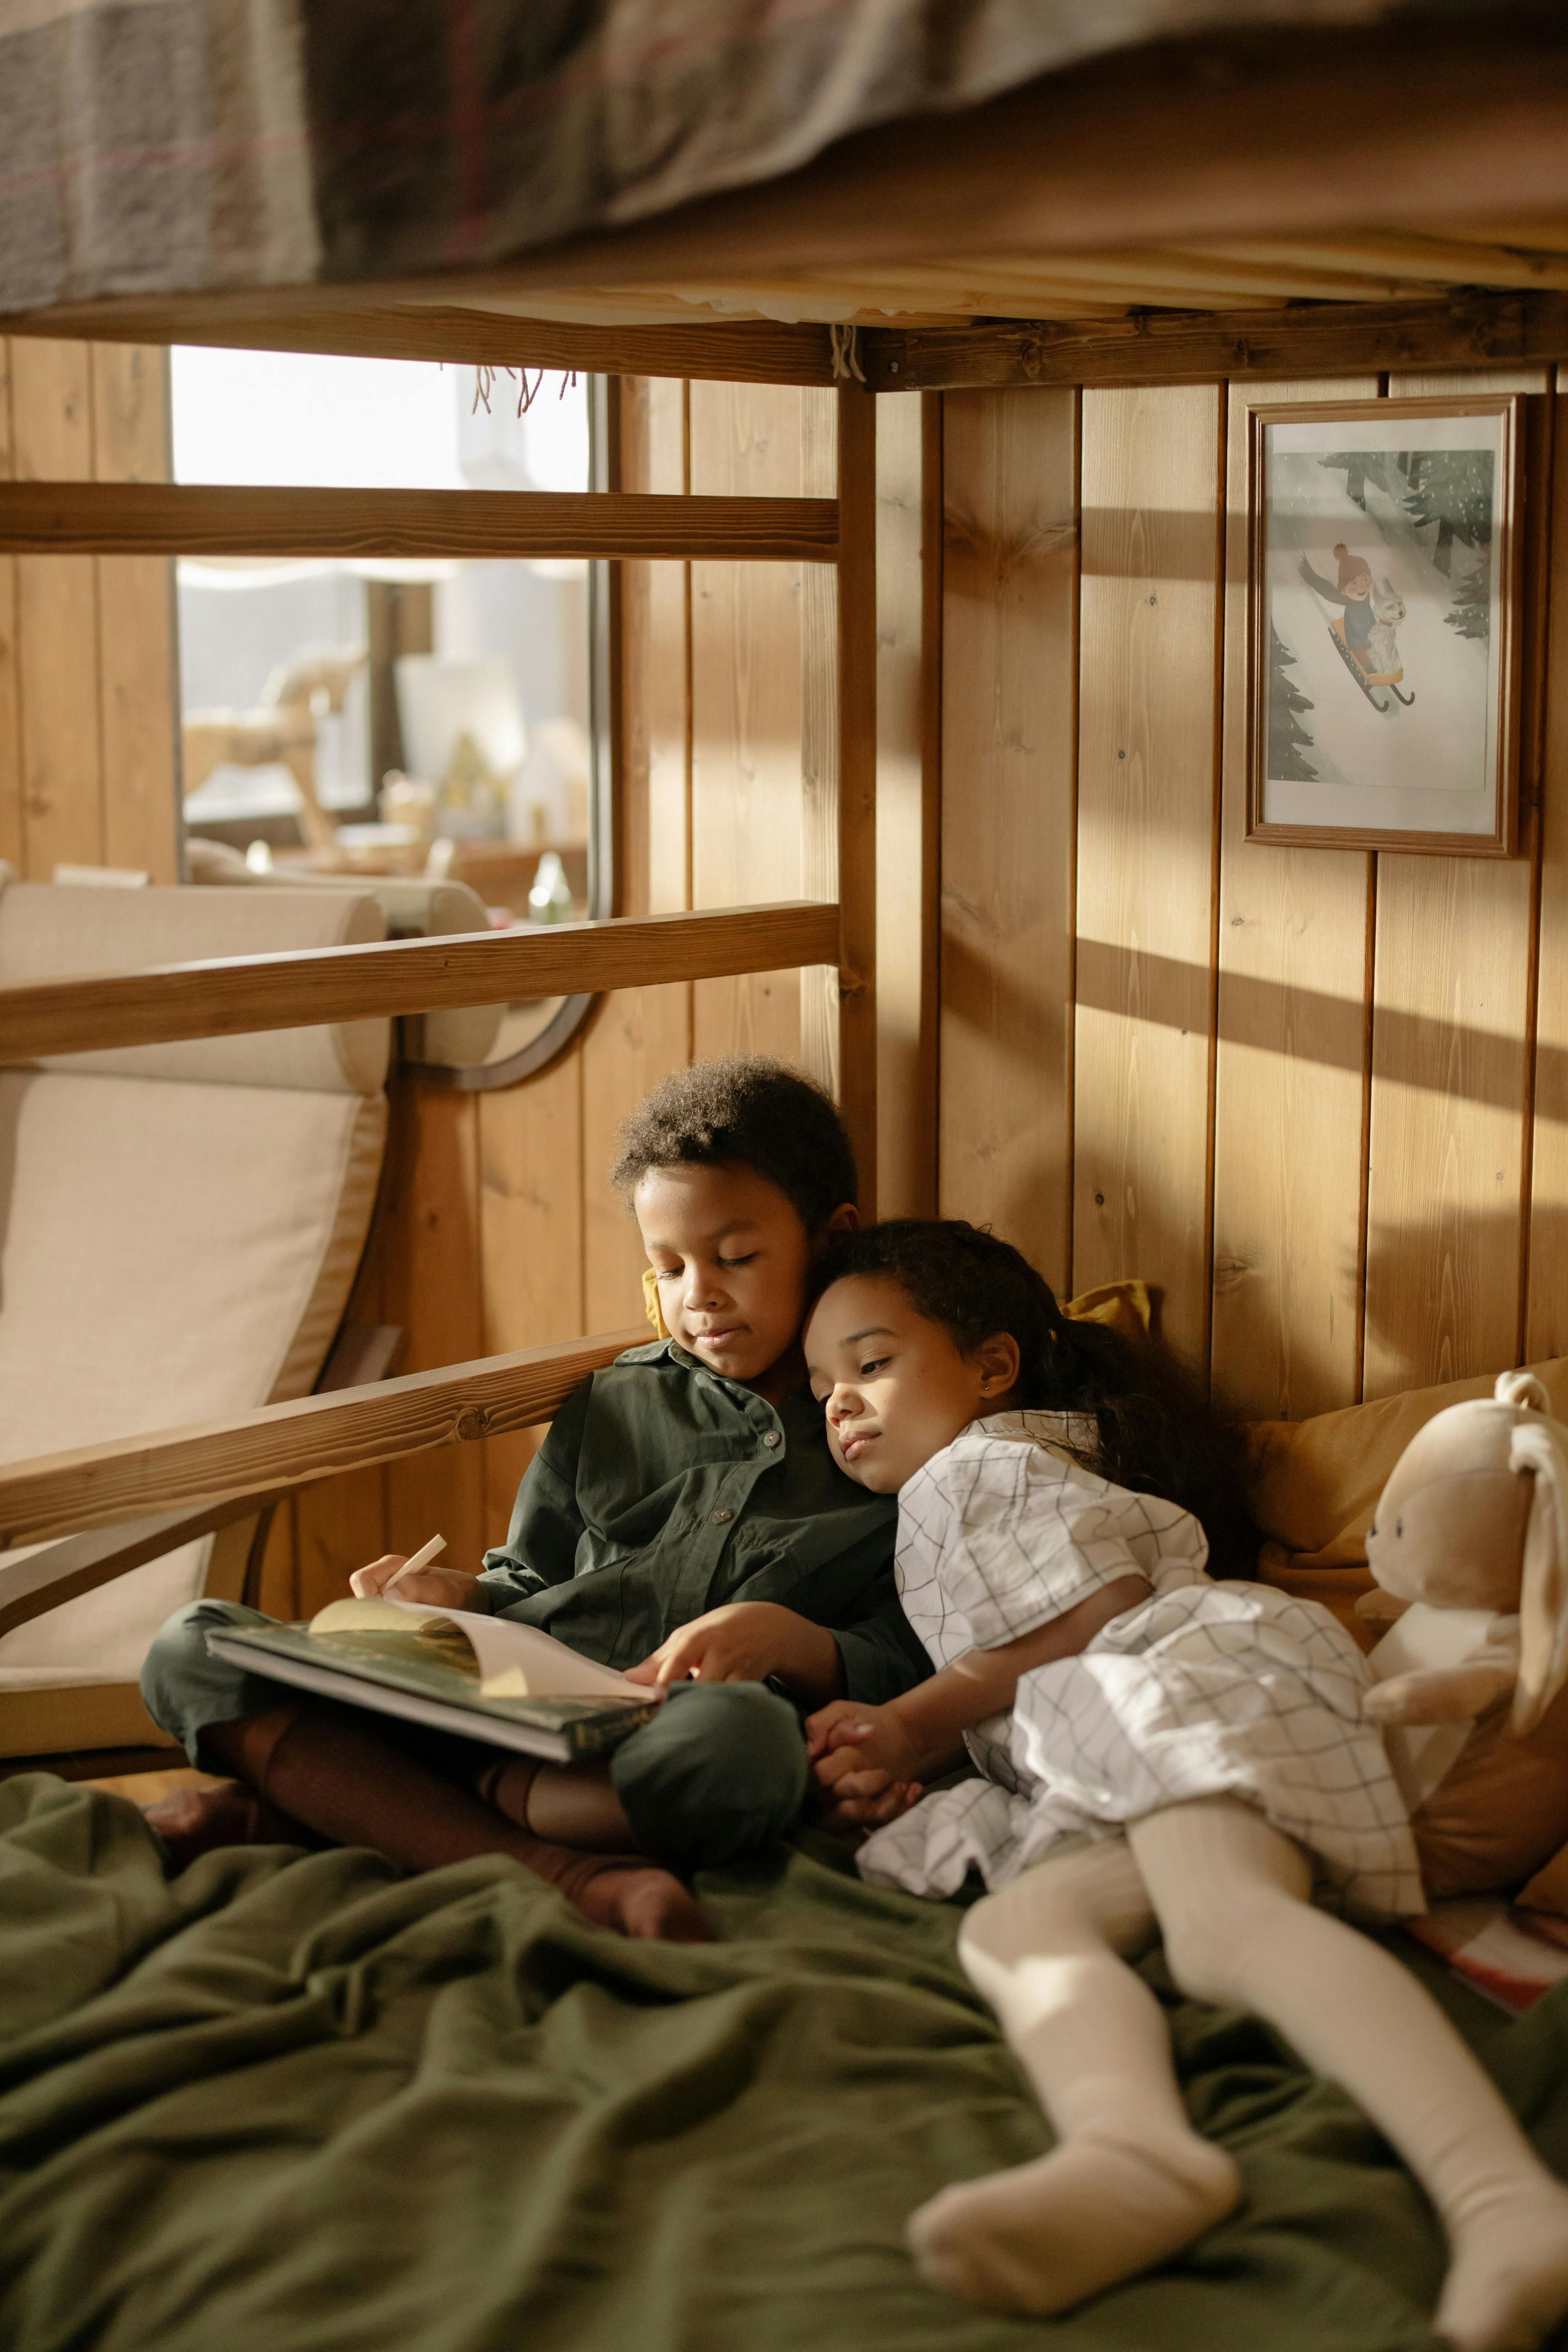 Two children reading a book together in a bunk bed in a room with warm light.